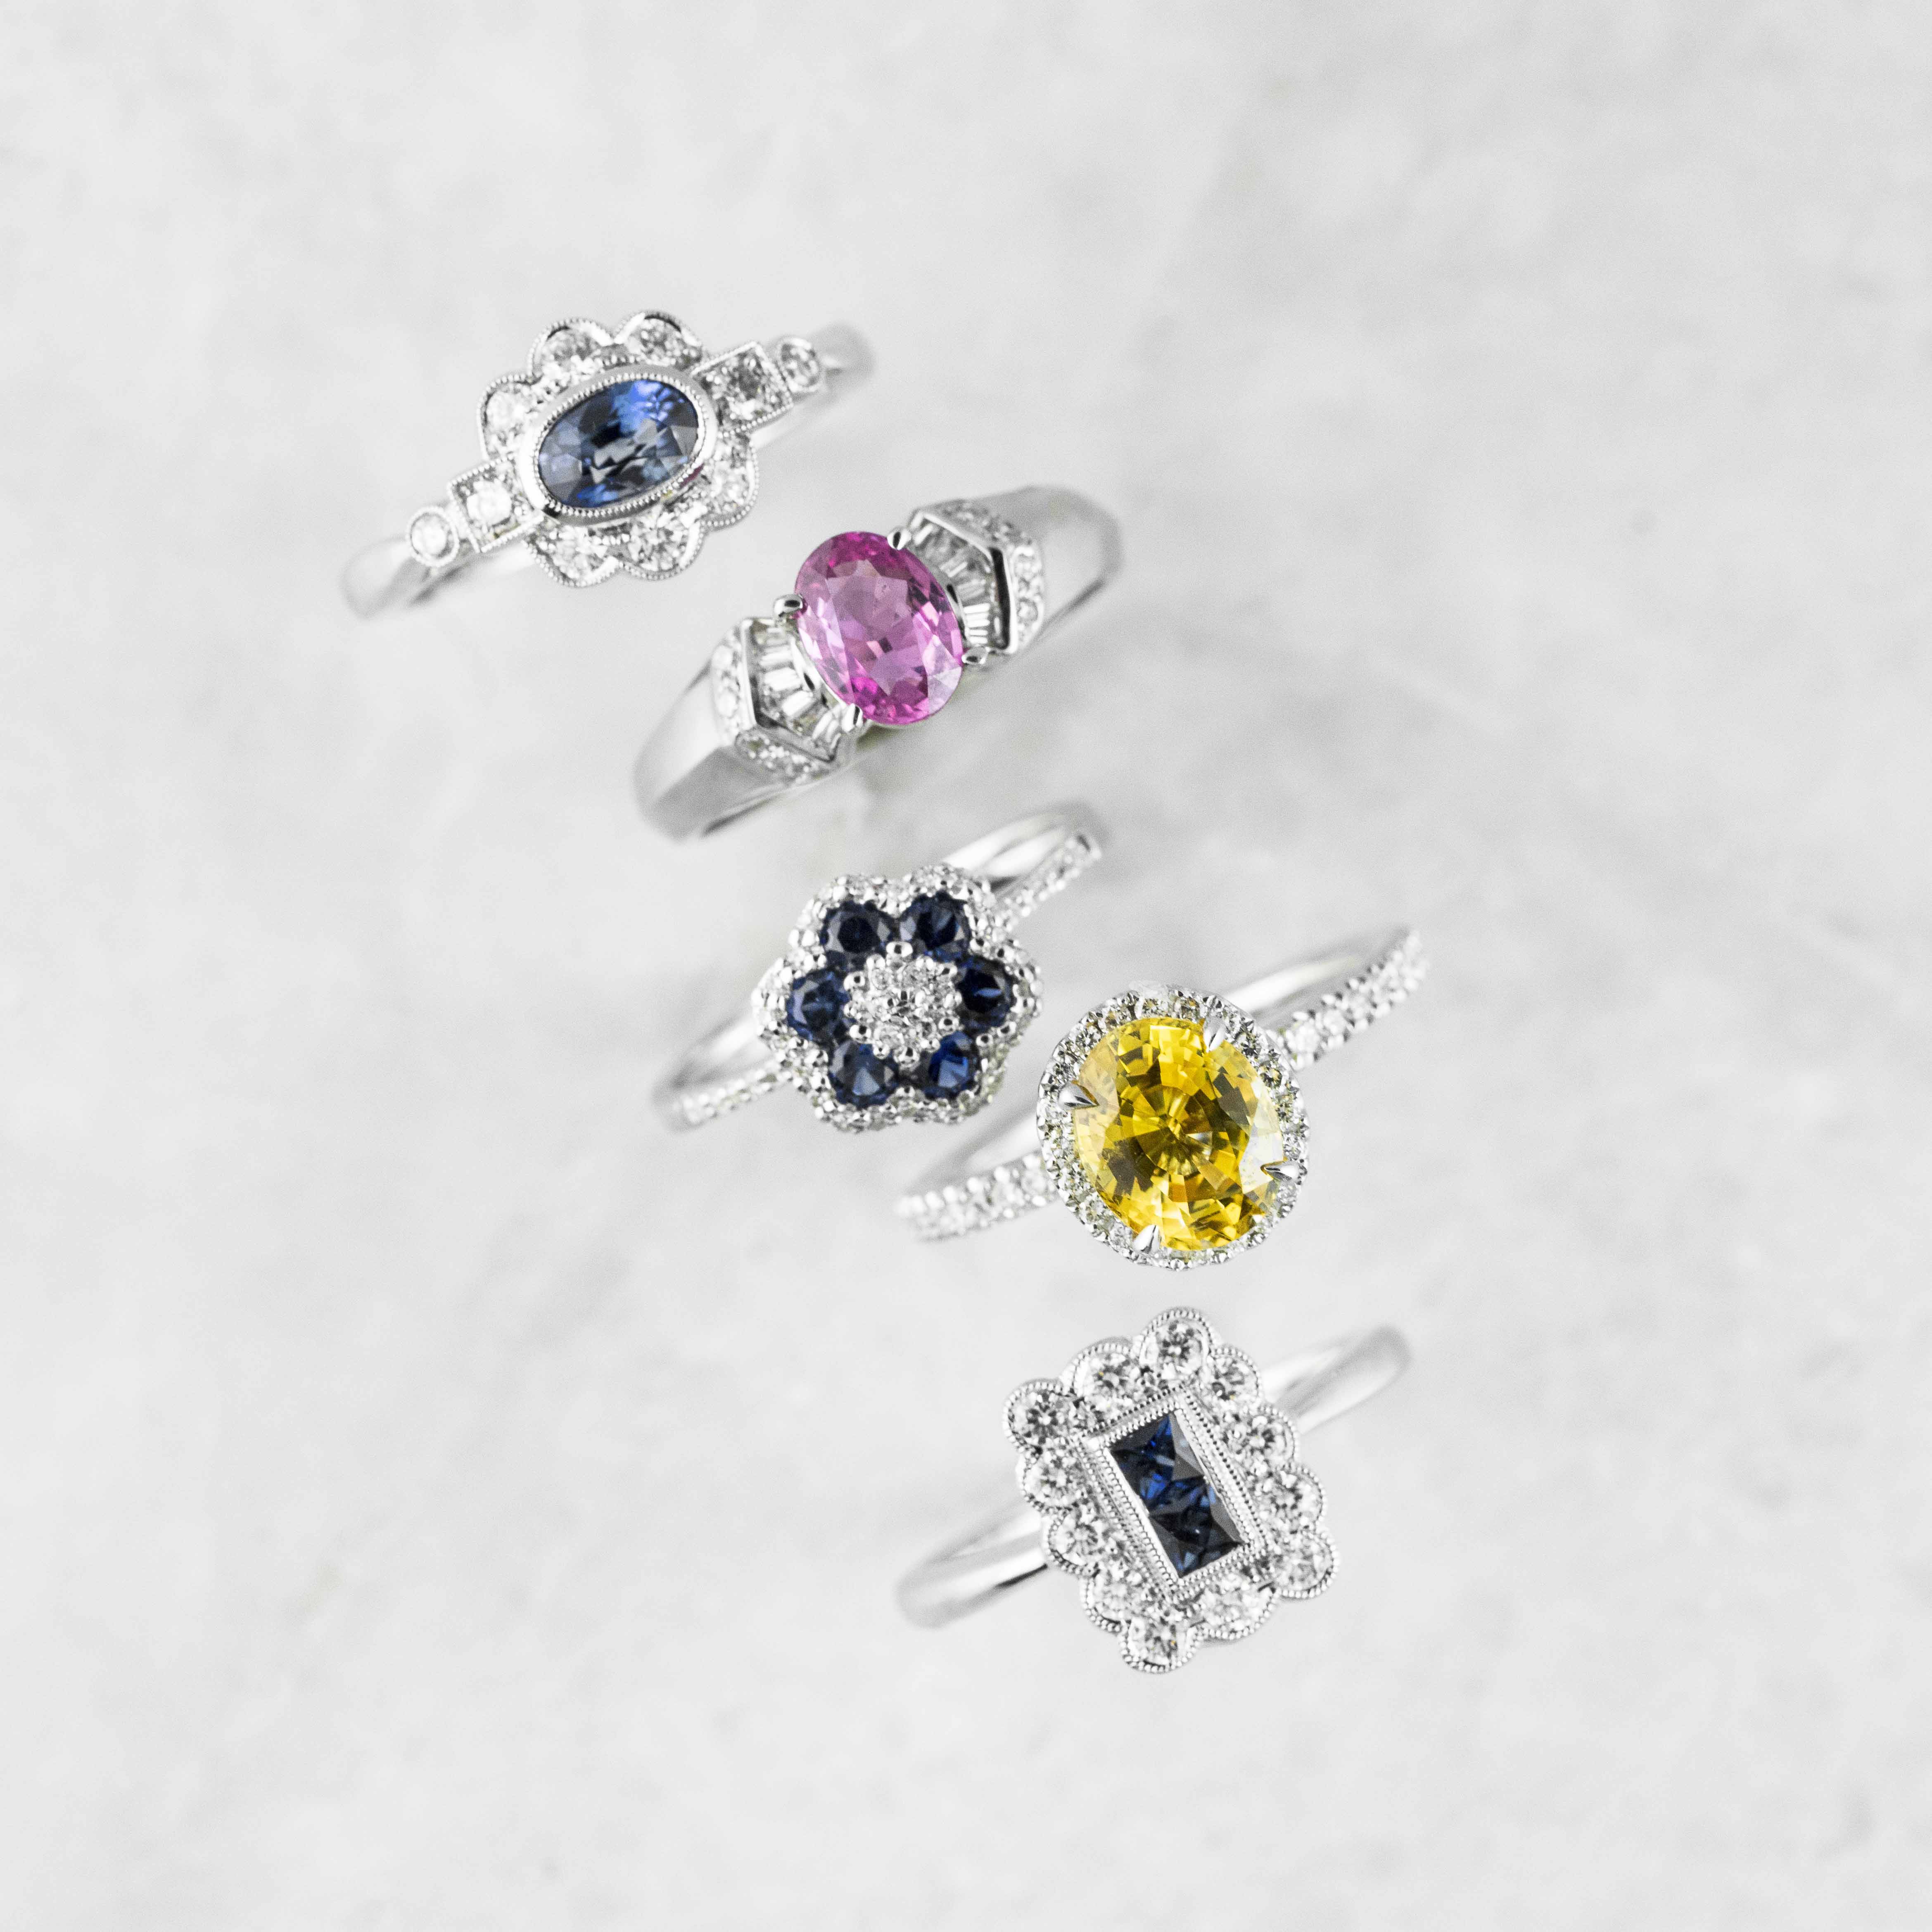 Five white gold engagement rings centered with different colored gemstones.